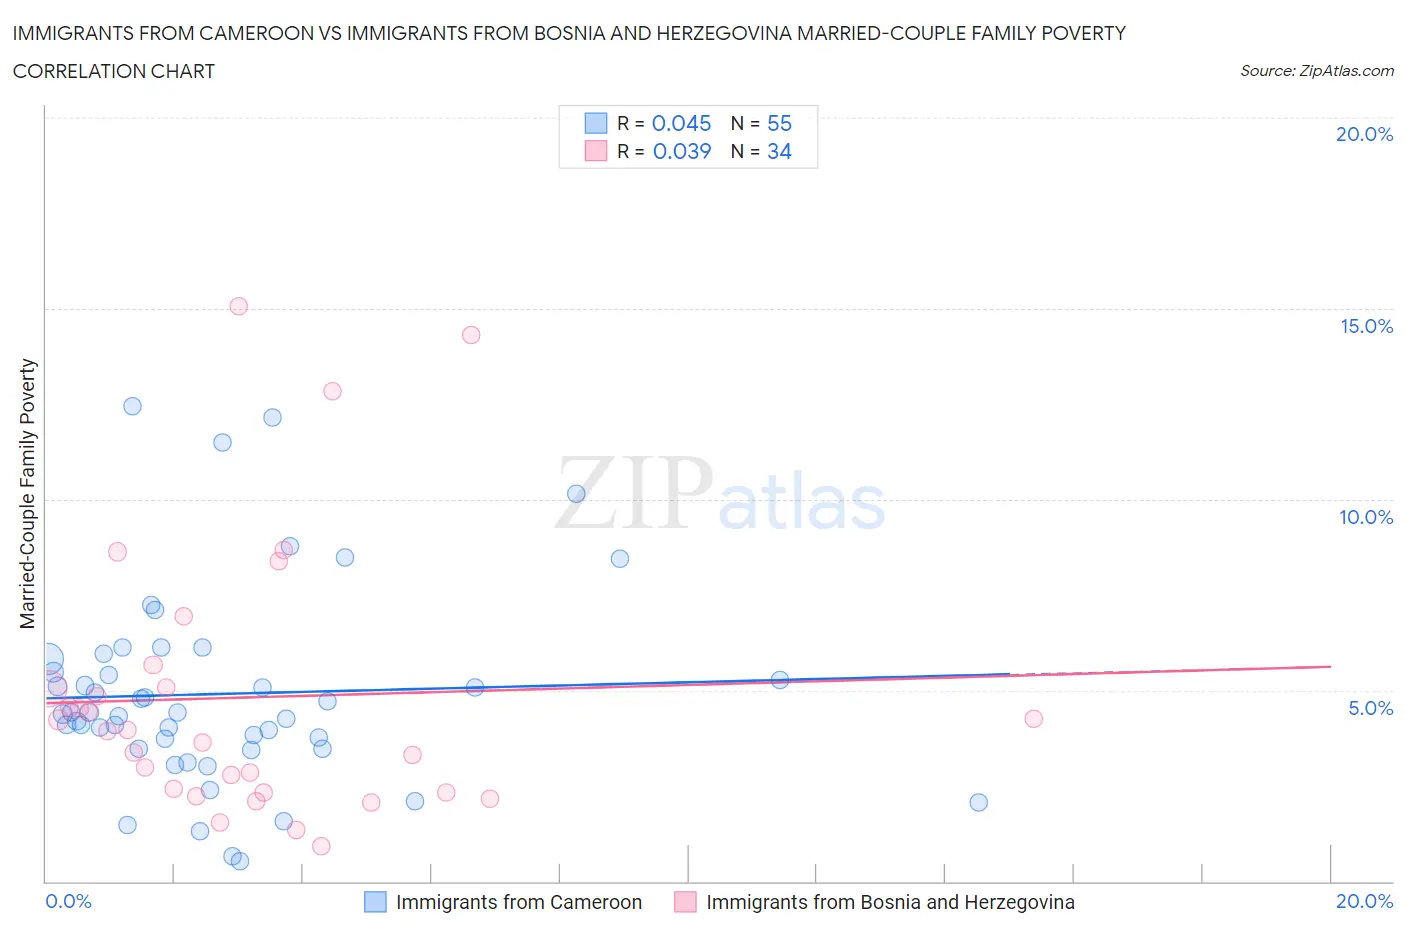 Immigrants from Cameroon vs Immigrants from Bosnia and Herzegovina Married-Couple Family Poverty